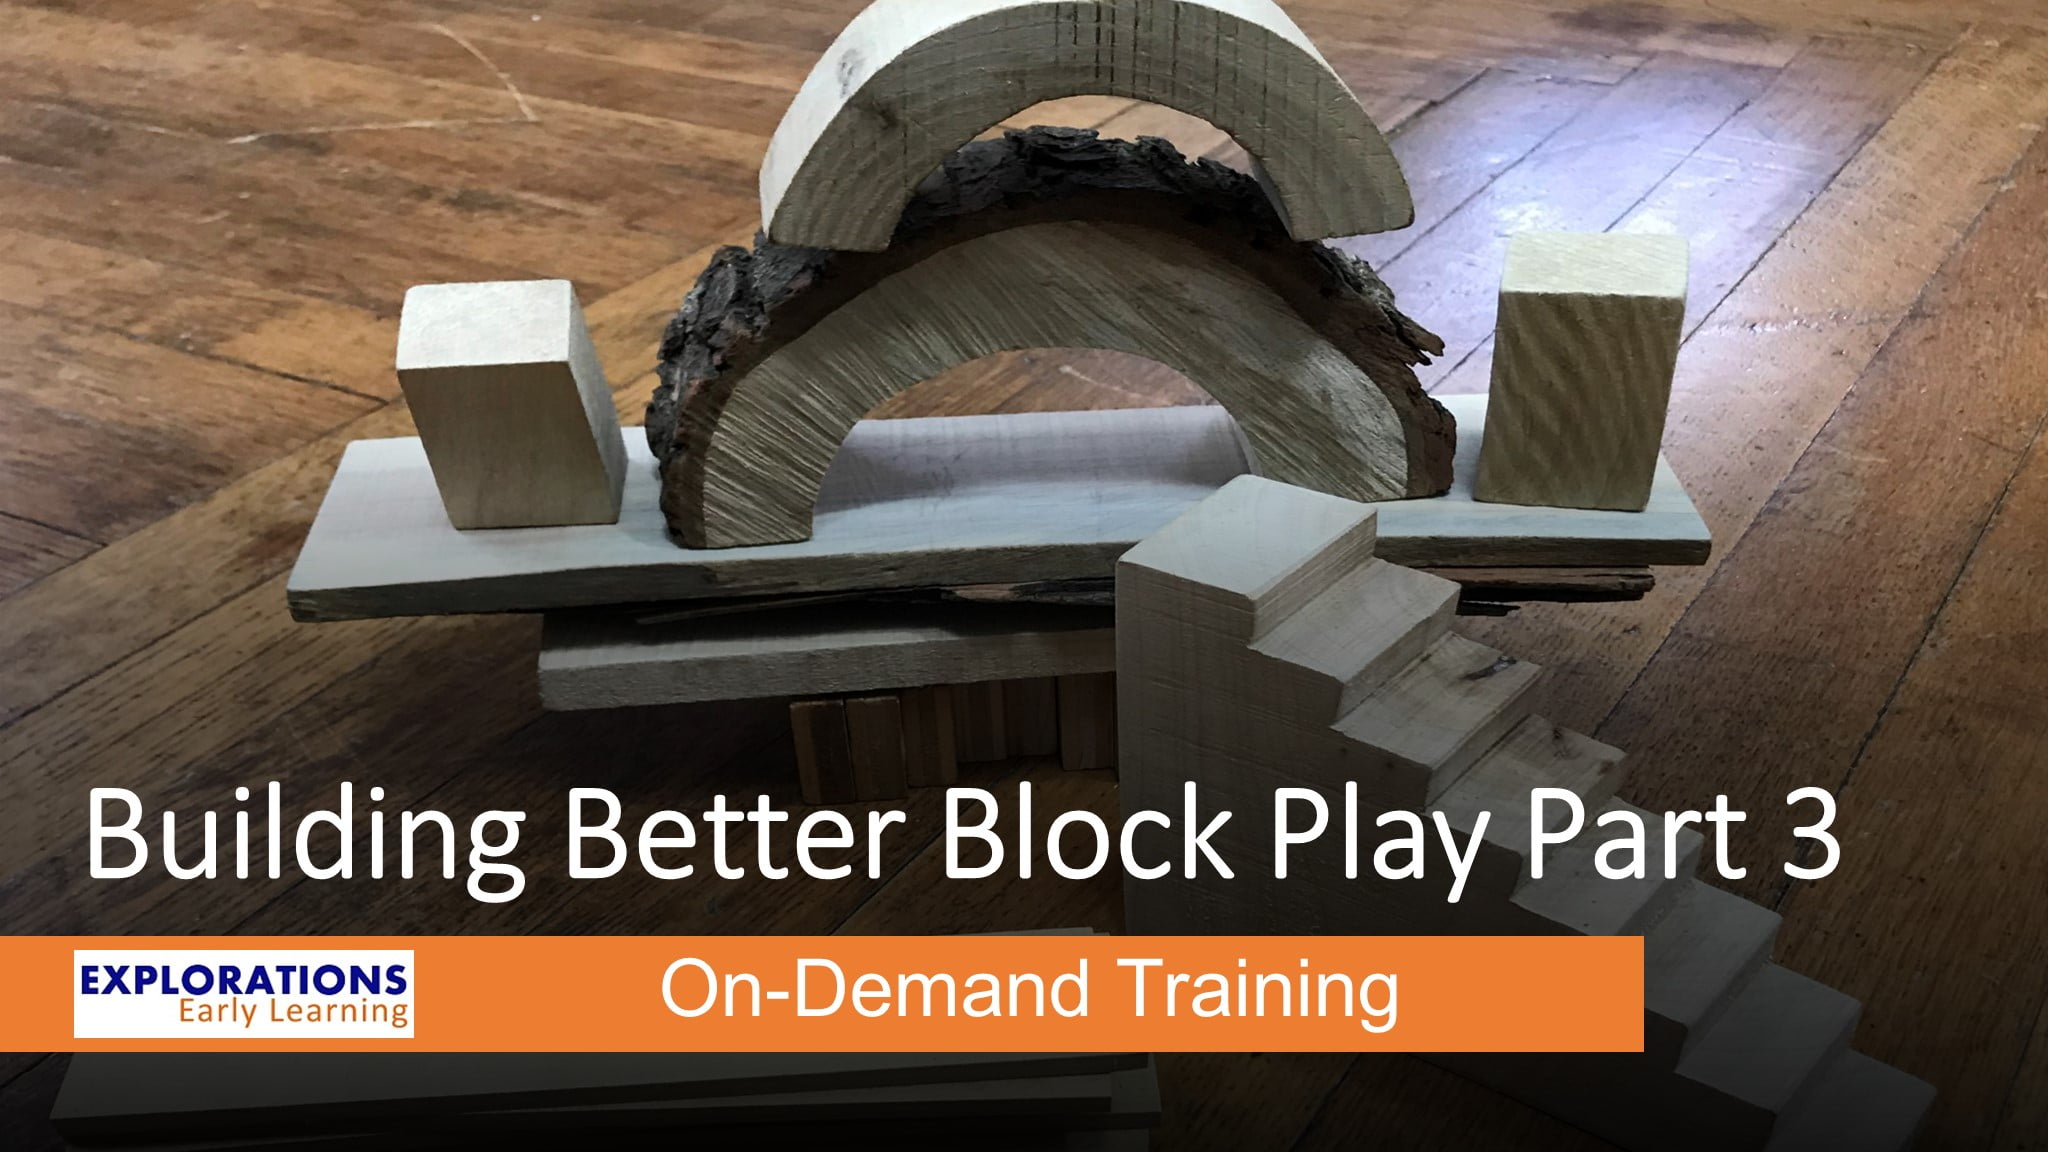 Building Better Block Play Part 3 | Resource Page